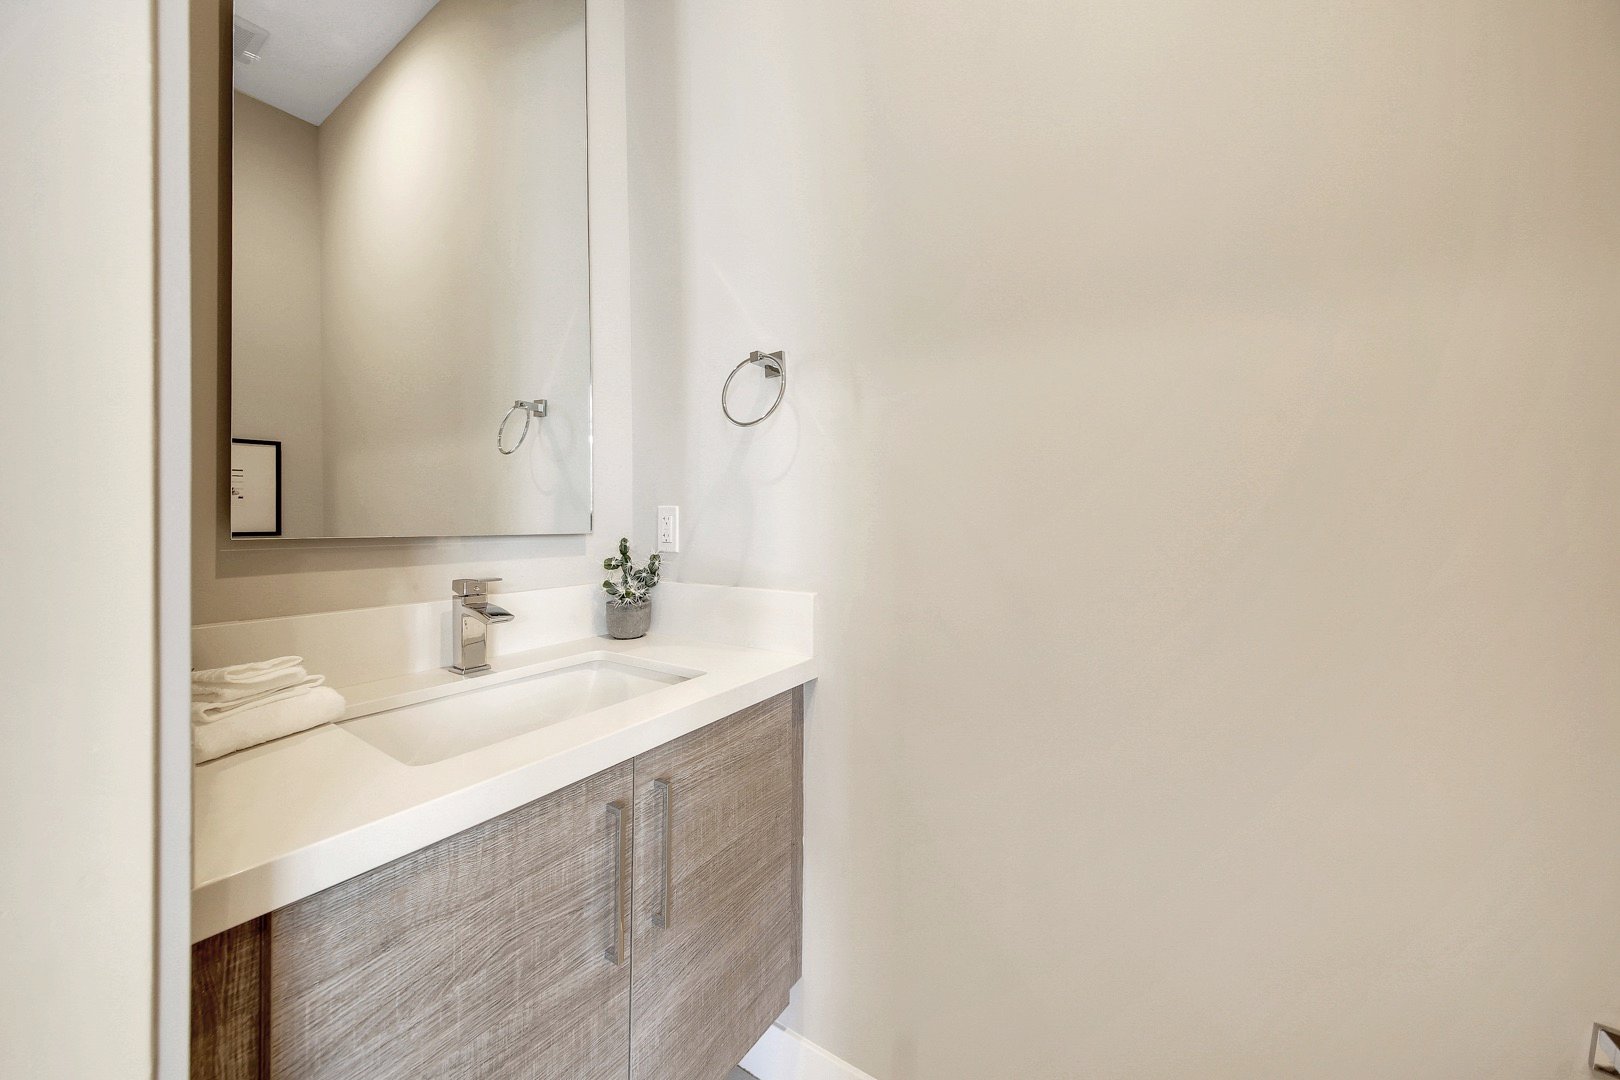 The powder room is located between bedrooms 2 and 3 and features a vanity sink.